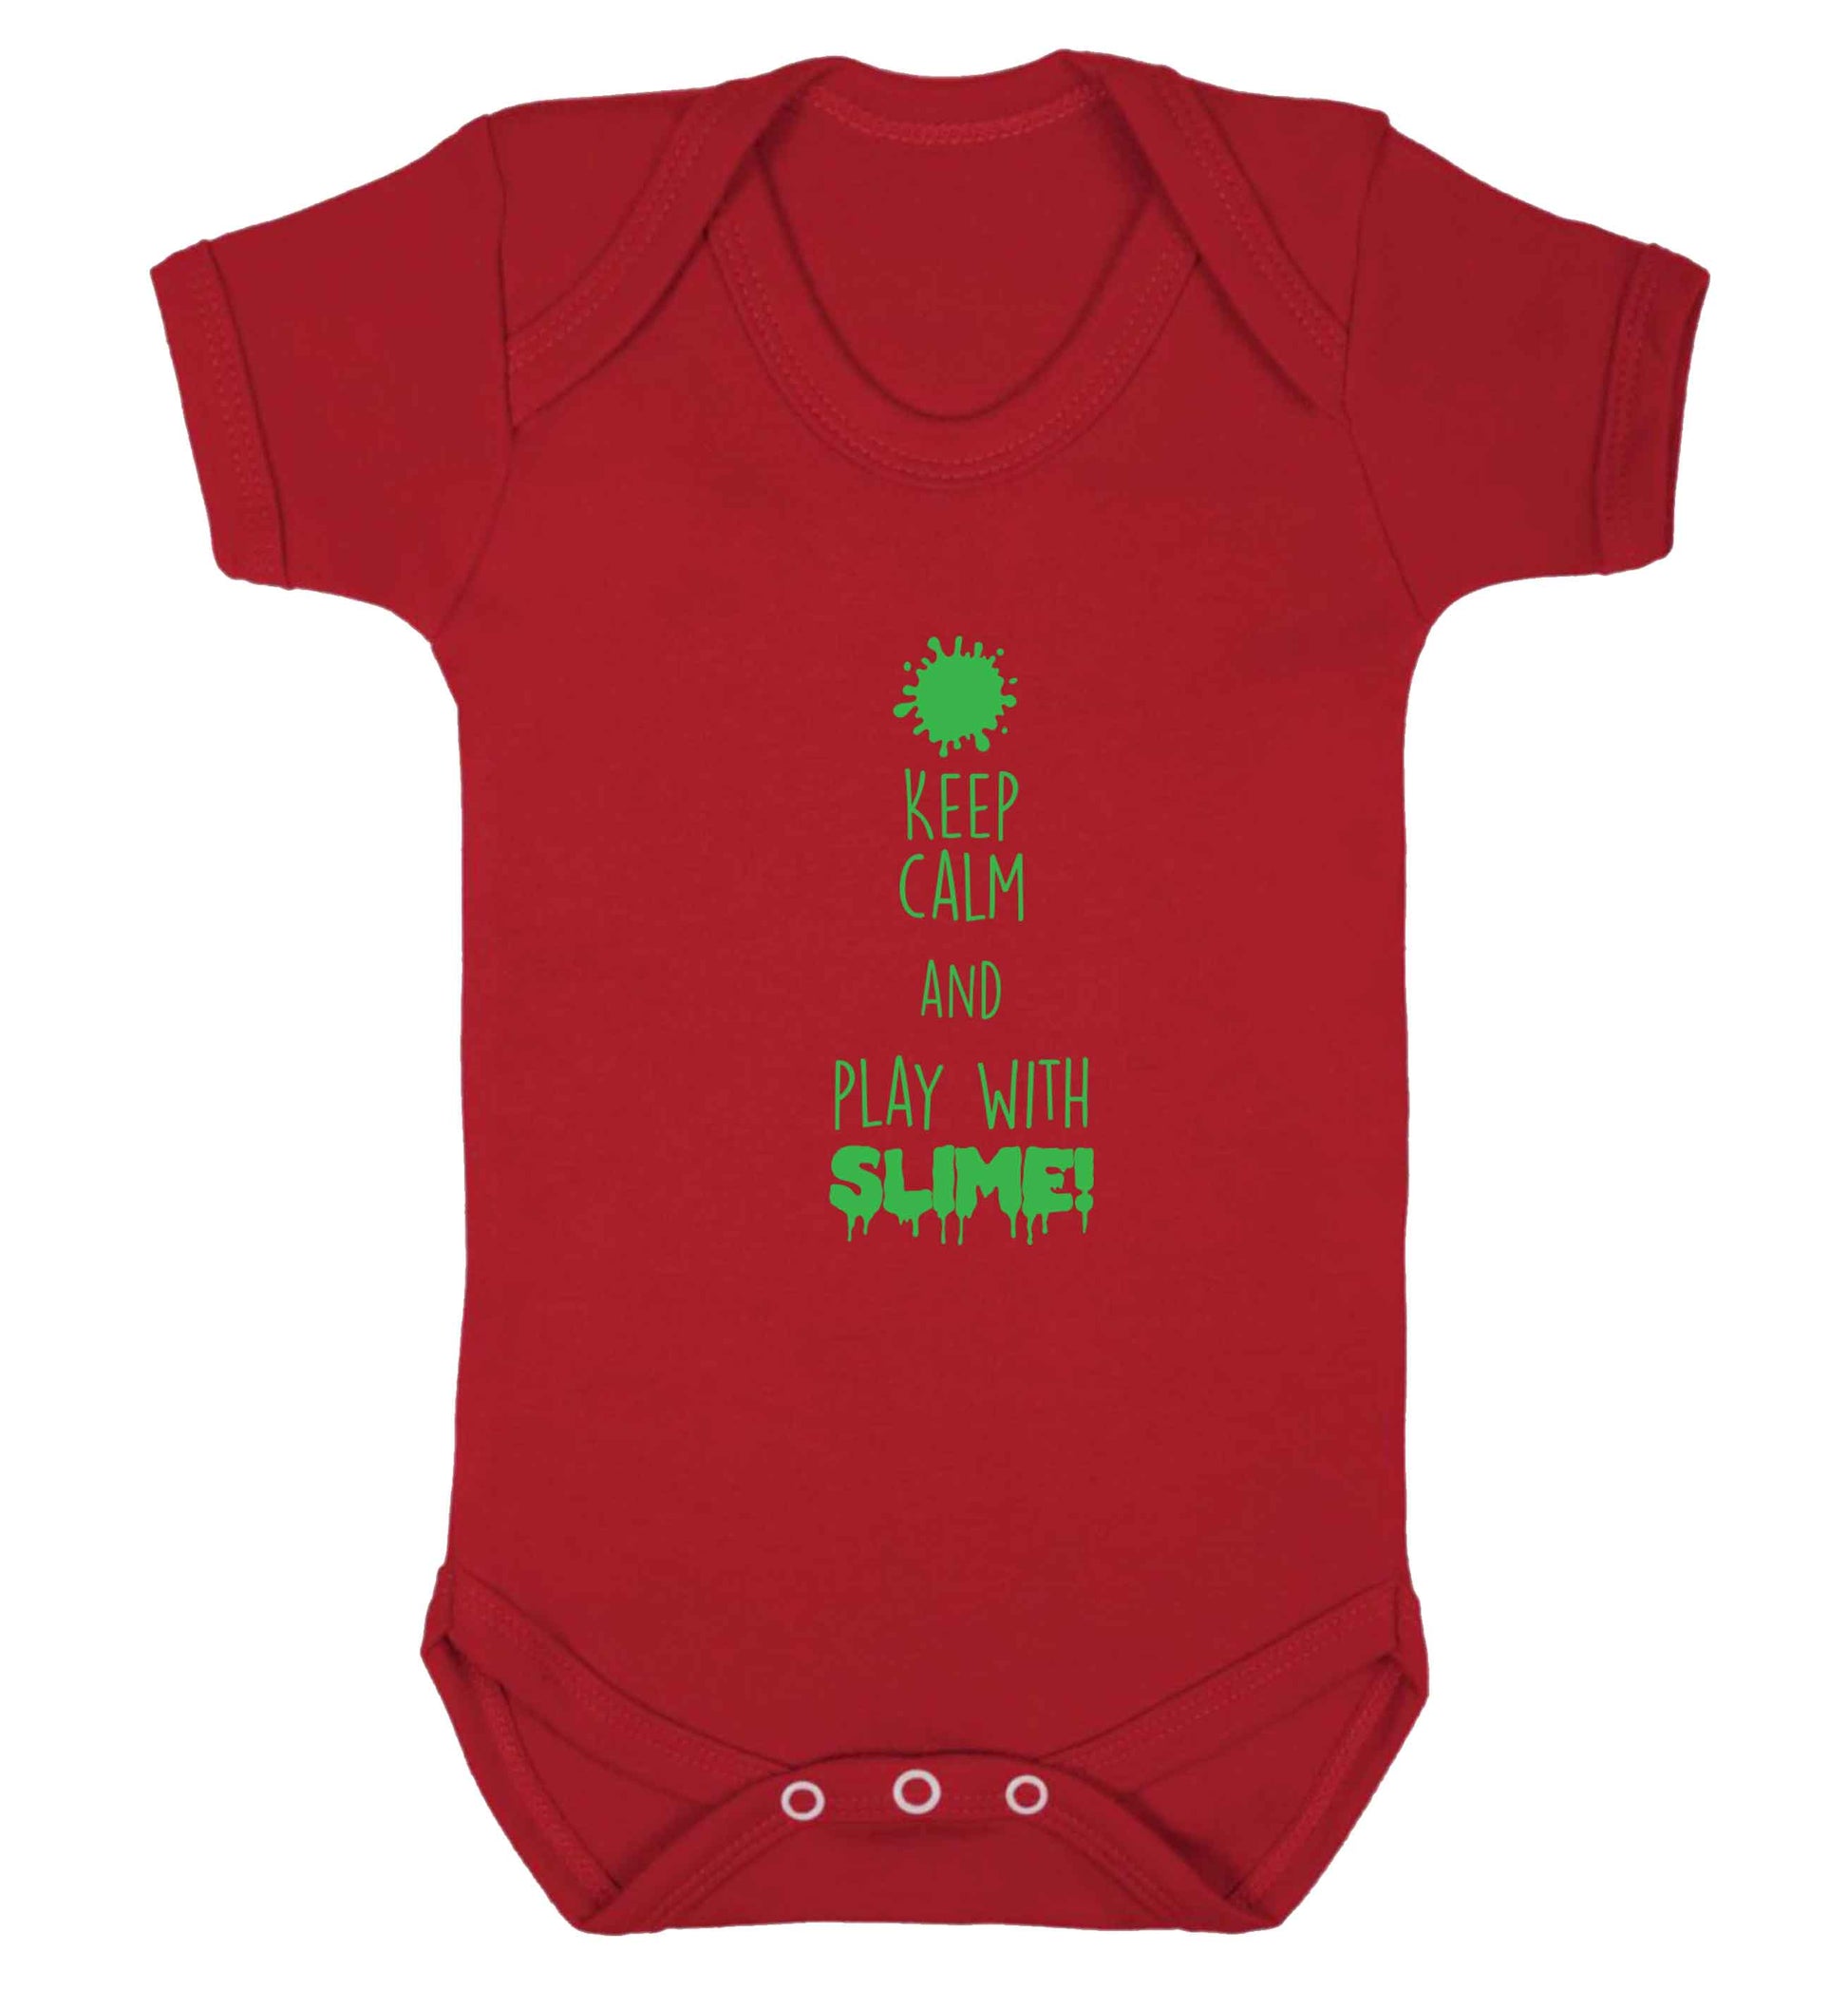 Neon green keep calm and play with slime!baby vest red 18-24 months